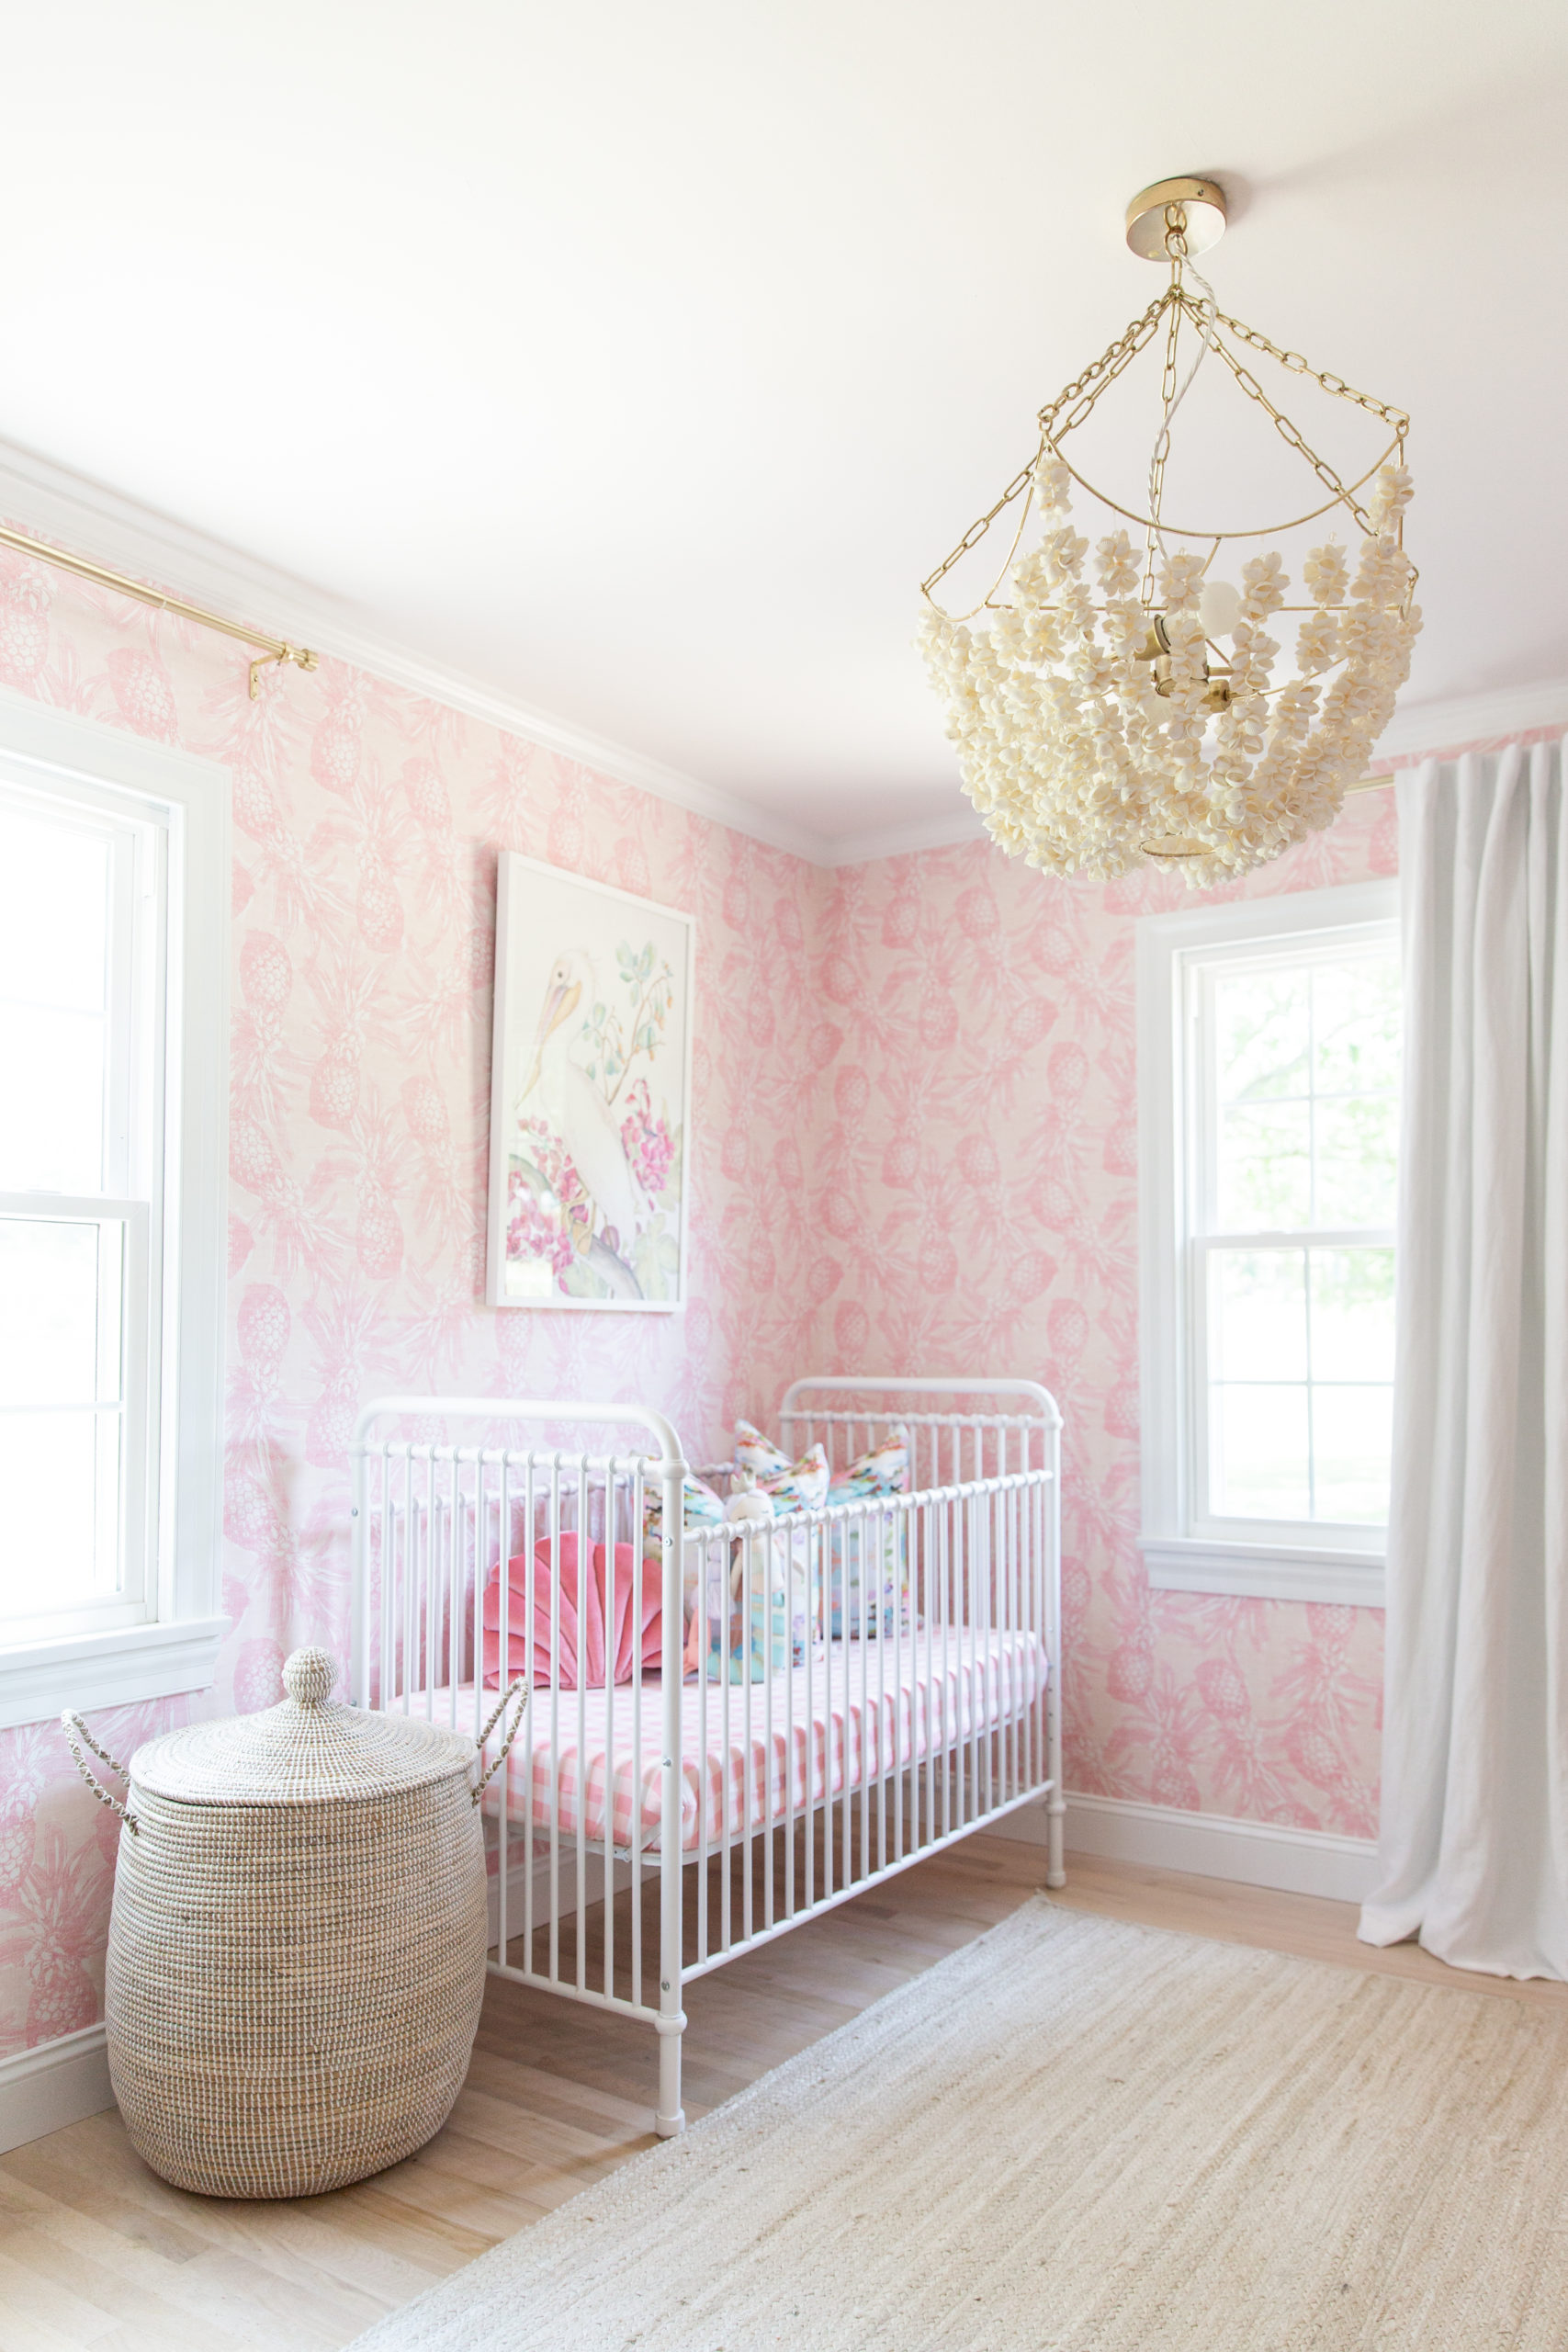 Girly Coastal Nursery with Pink Pineapple Wallpaper and Shell Chandelier